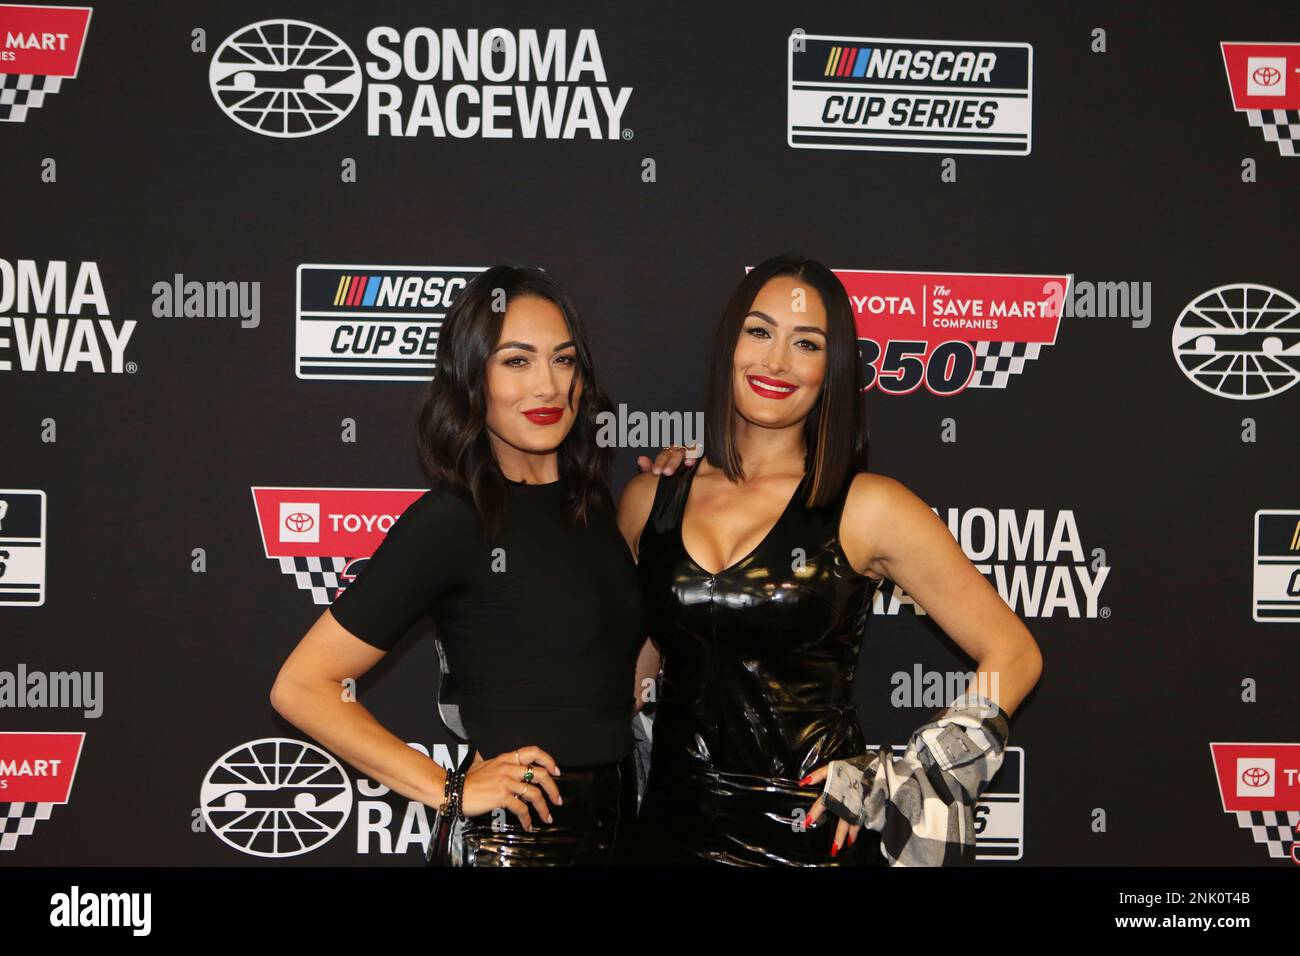 SONOMA, CA - JUNE 12: Professional tag team wrestlers The Bella Twins, Brie  Bella (left) and Nikki Bella (right) during a pre race press conference for  the NASCAR Cup Series Toyota/Save Mart